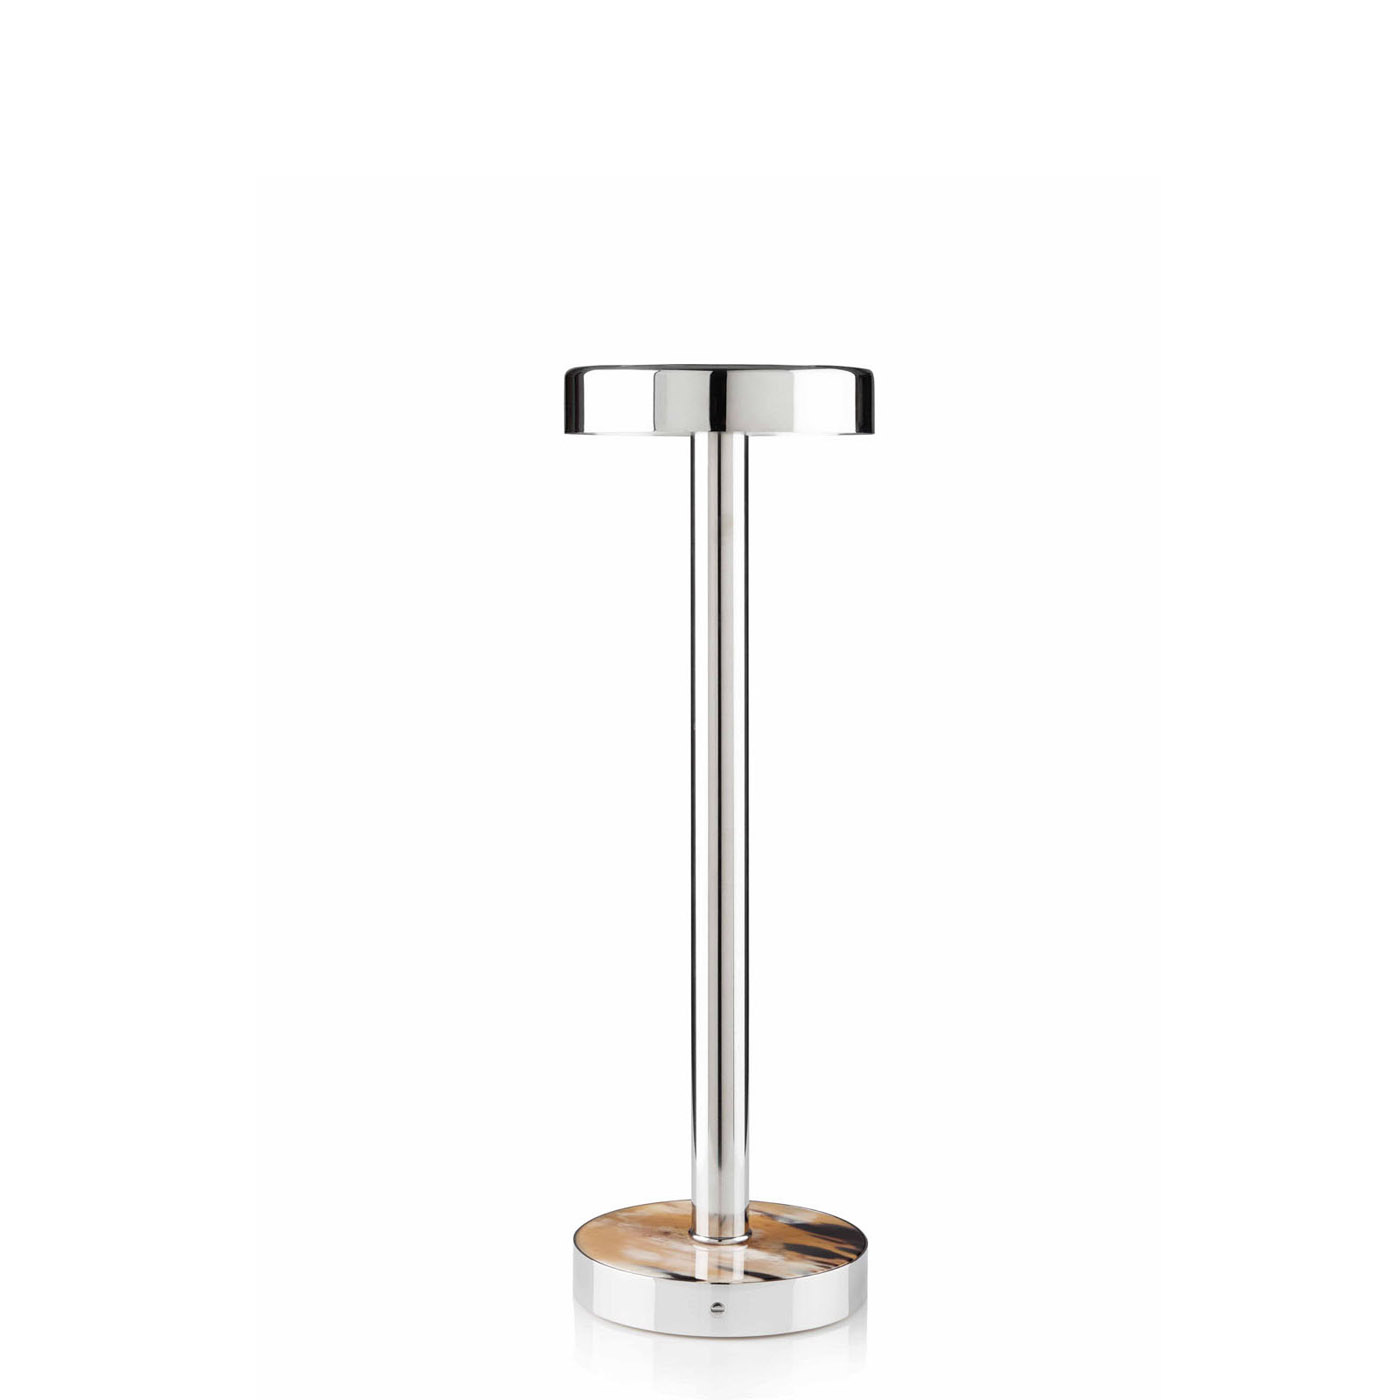 Tableware - Artica portable stand in horn and stainless steel - Arcahorn